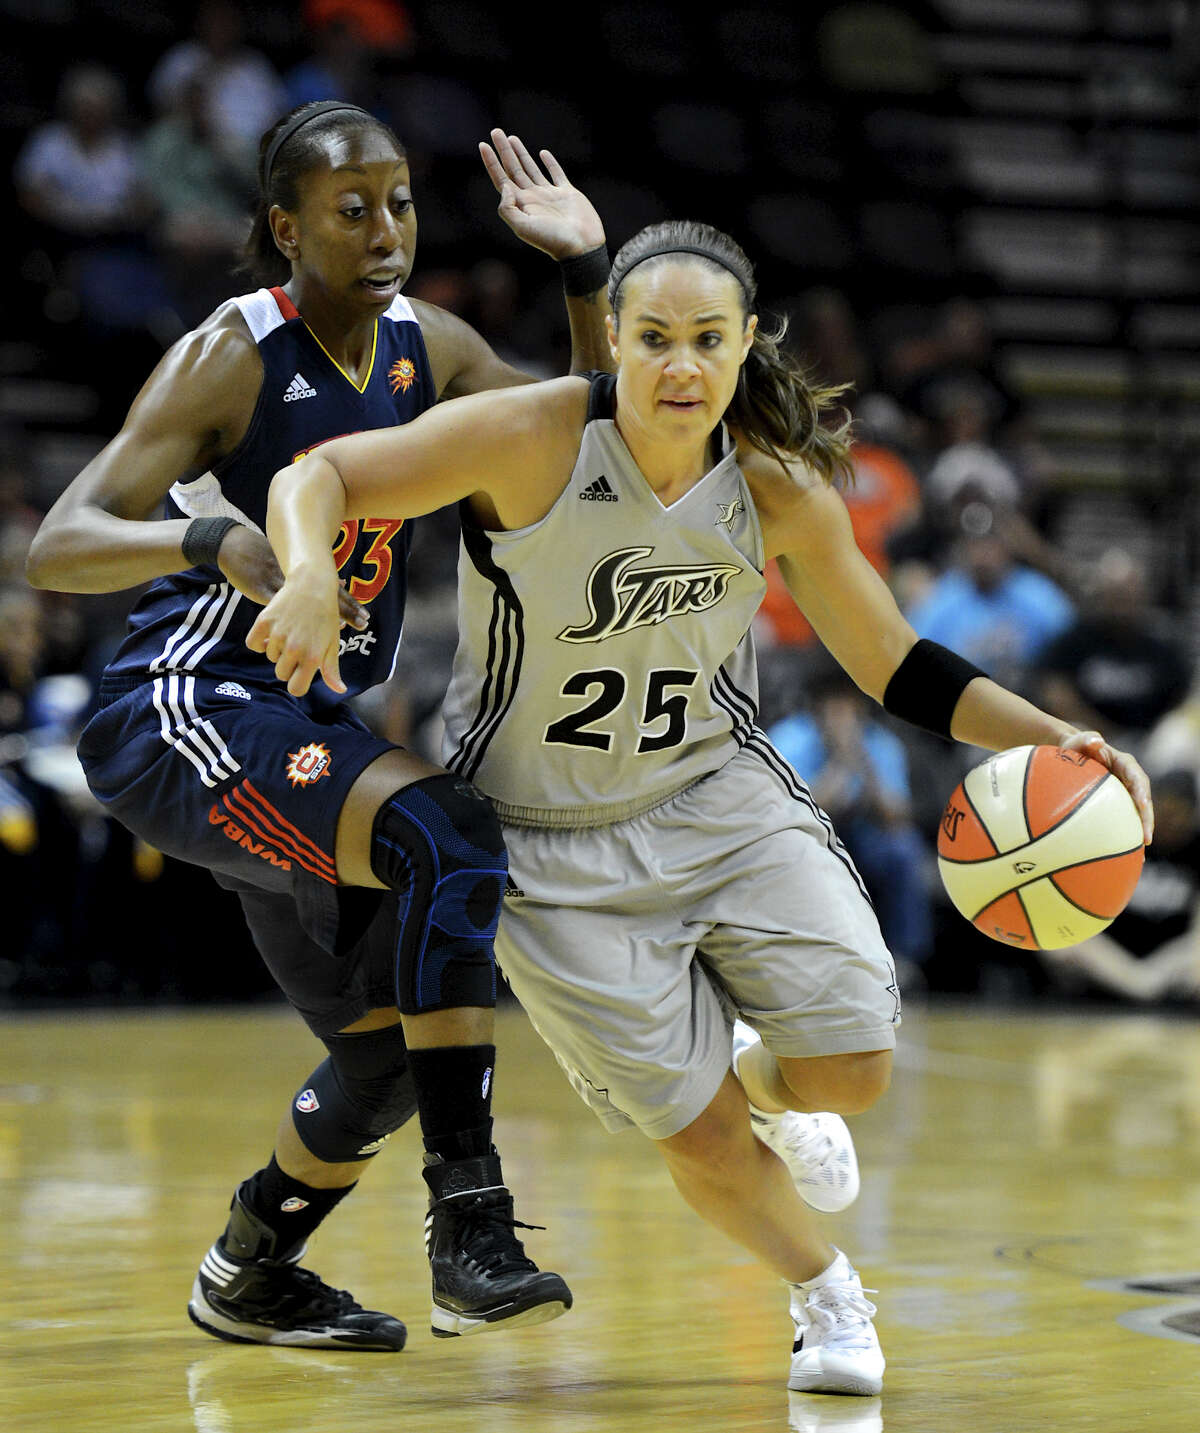 San Antonio Silver Stars' Becky Hammon (25) dribbles the ball around Connecticut Sun's Allison Hightower (23) during a WNBA game between the San Antonio Silver Stars and the Connecticut Sun on August 30, 2012 at the AT&T Center in San Antonio Texas. John Albright / Special to the Express-News.